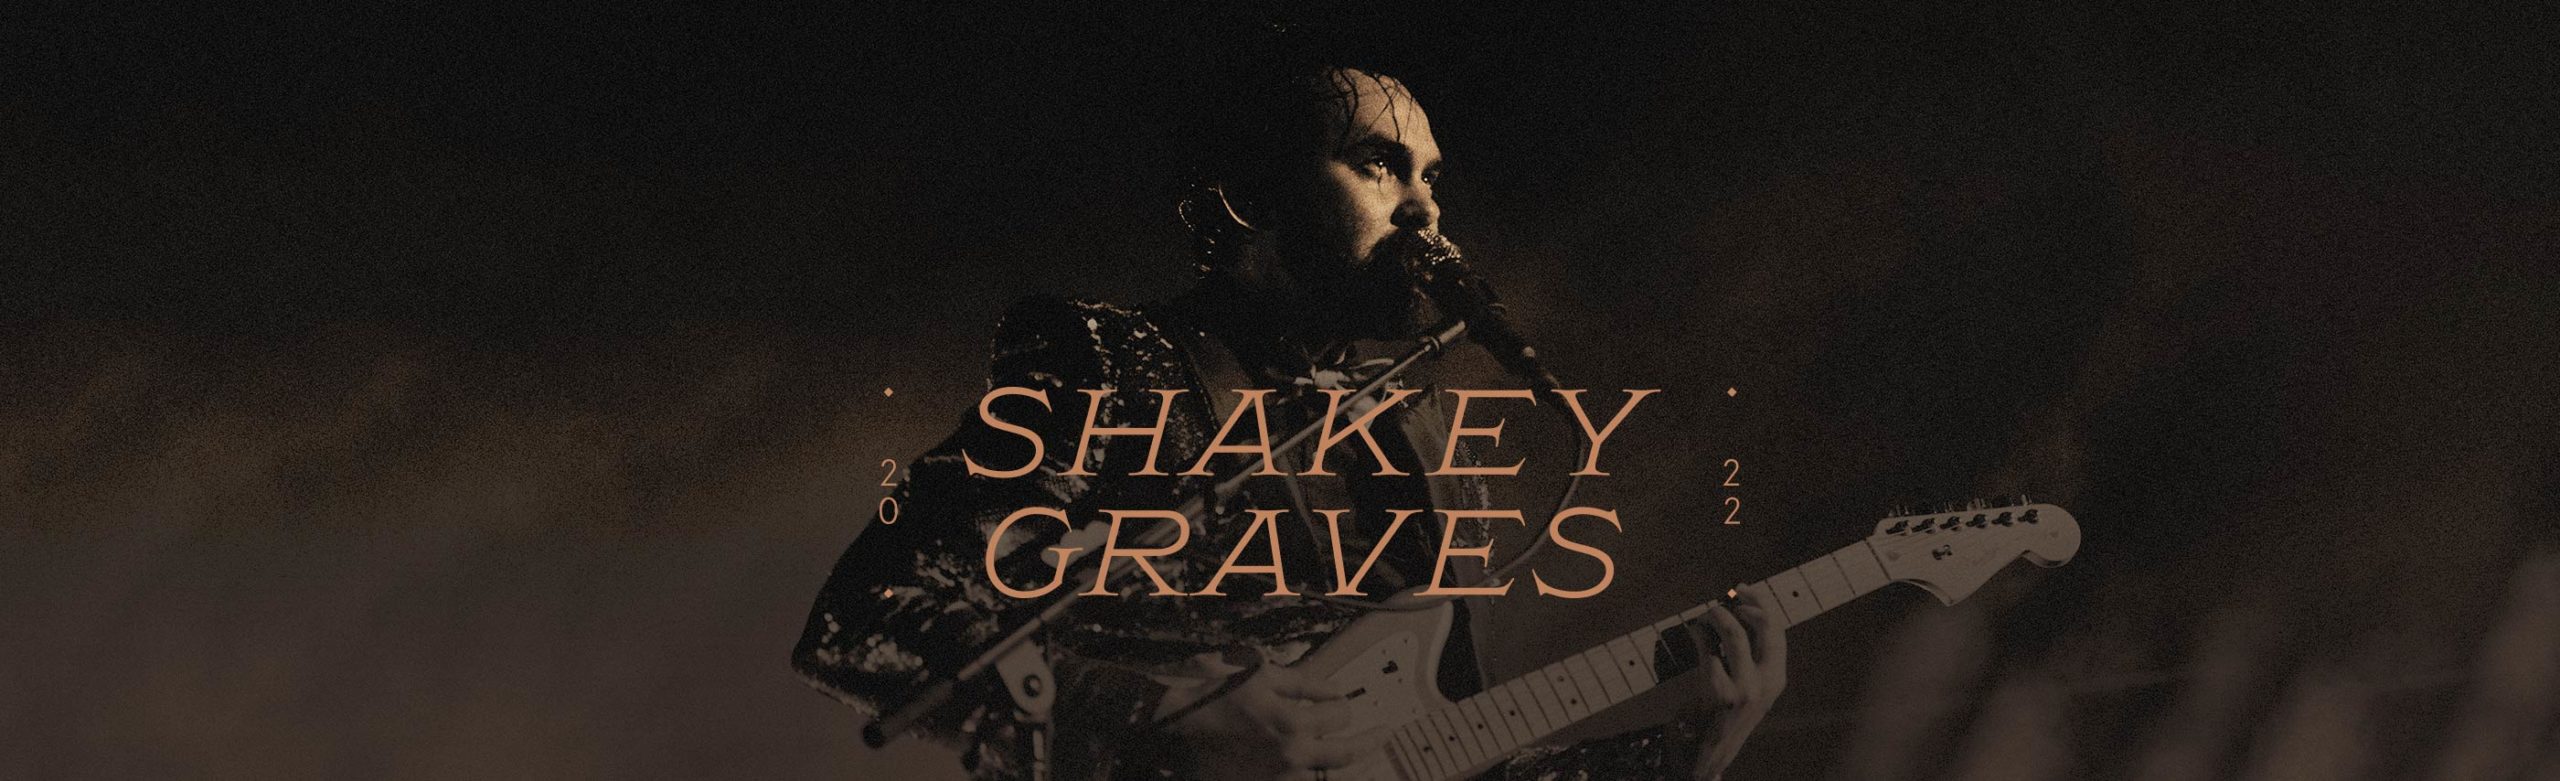 Event Info: Shakey Graves at KettleHouse Amphitheater 2022 Image